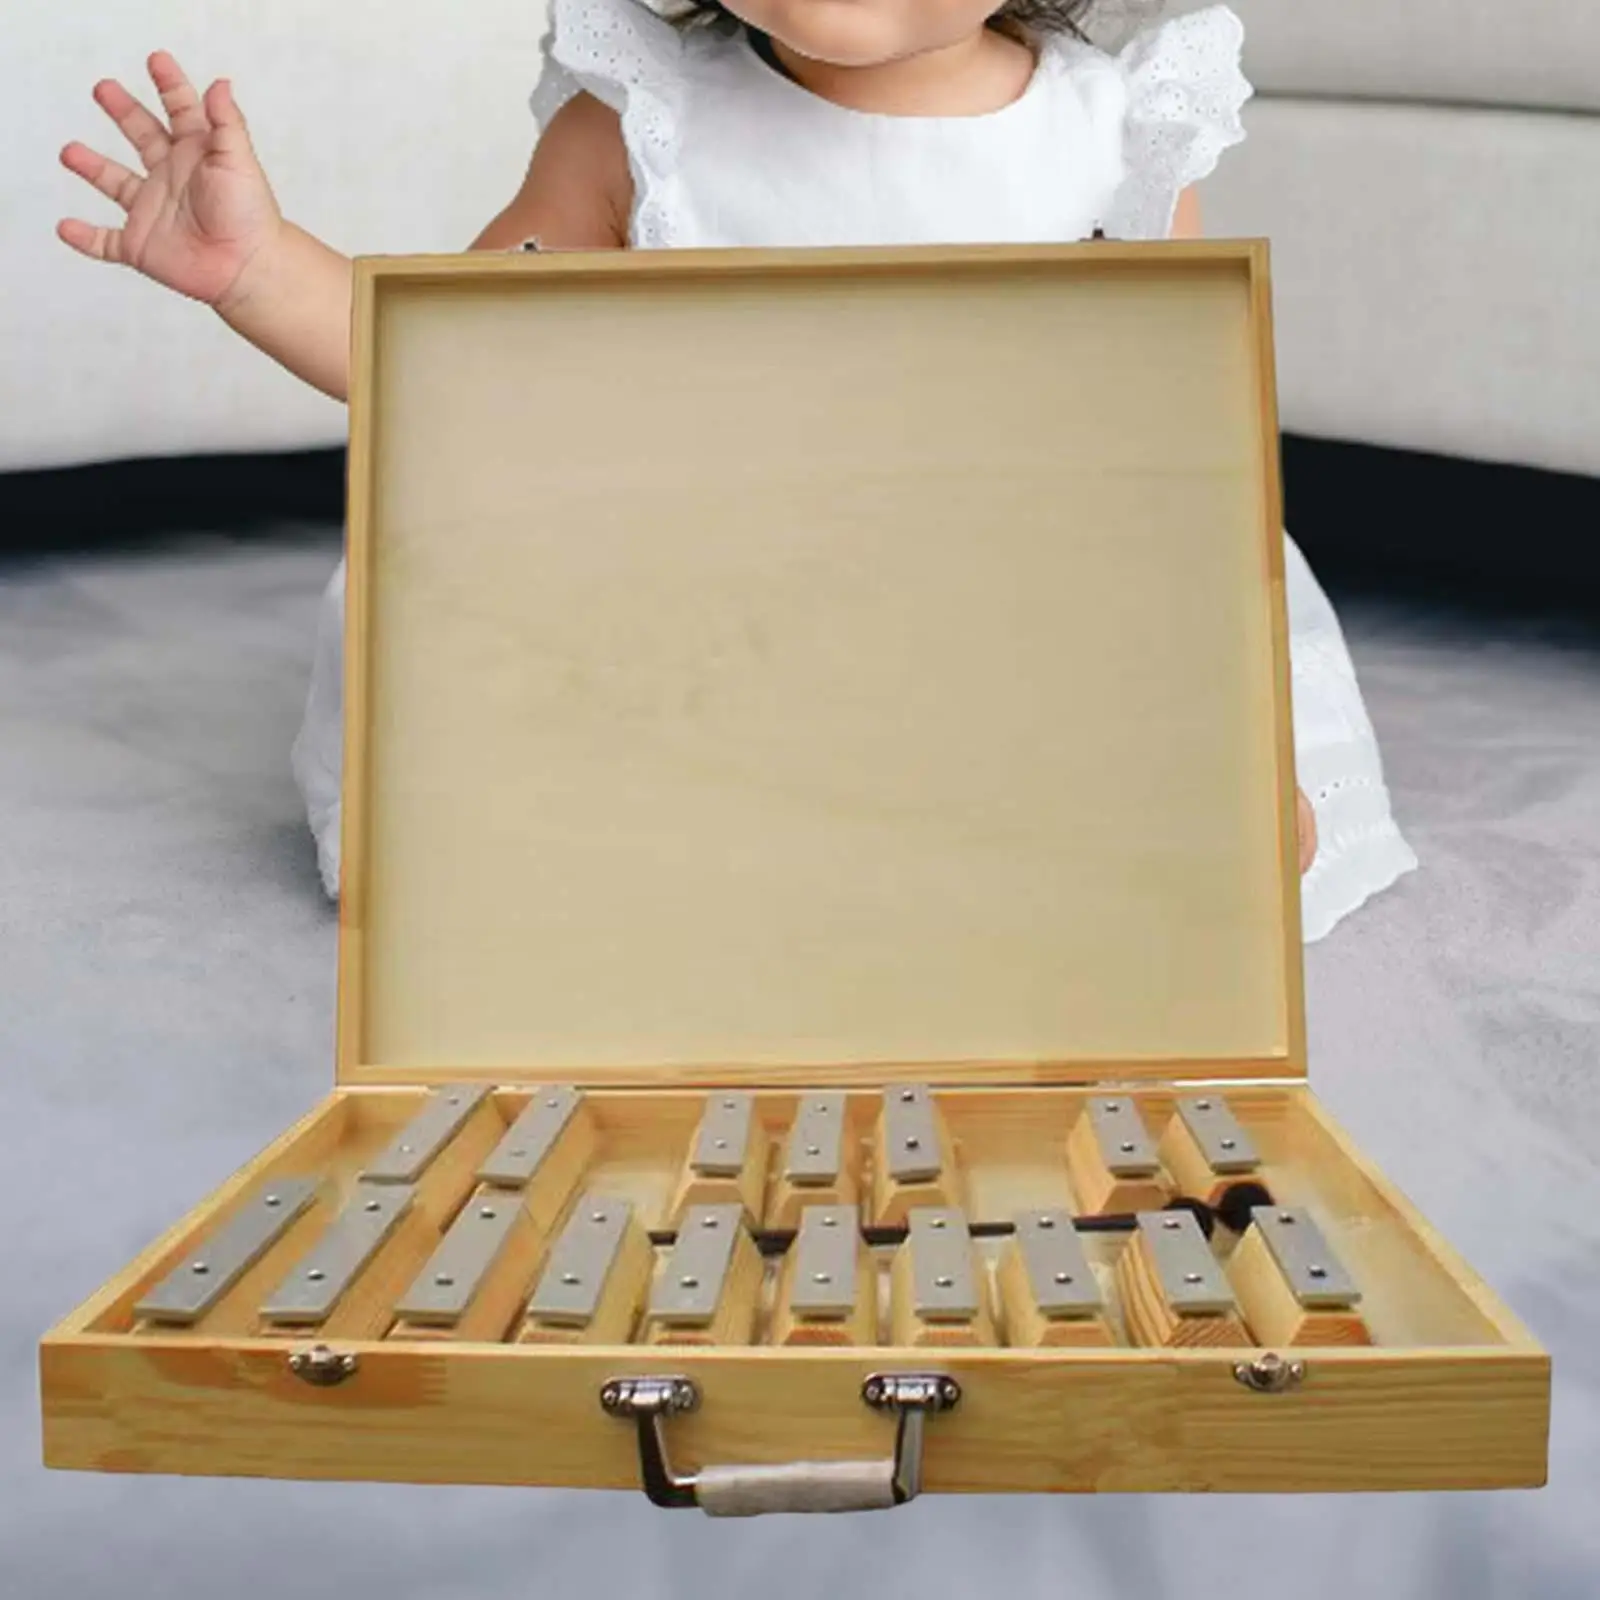 Xylophone Educational Musical Instruments Educational Musical Instruments Toy 17 Tone Xylophone Glockenspiel Xylophone for Kids